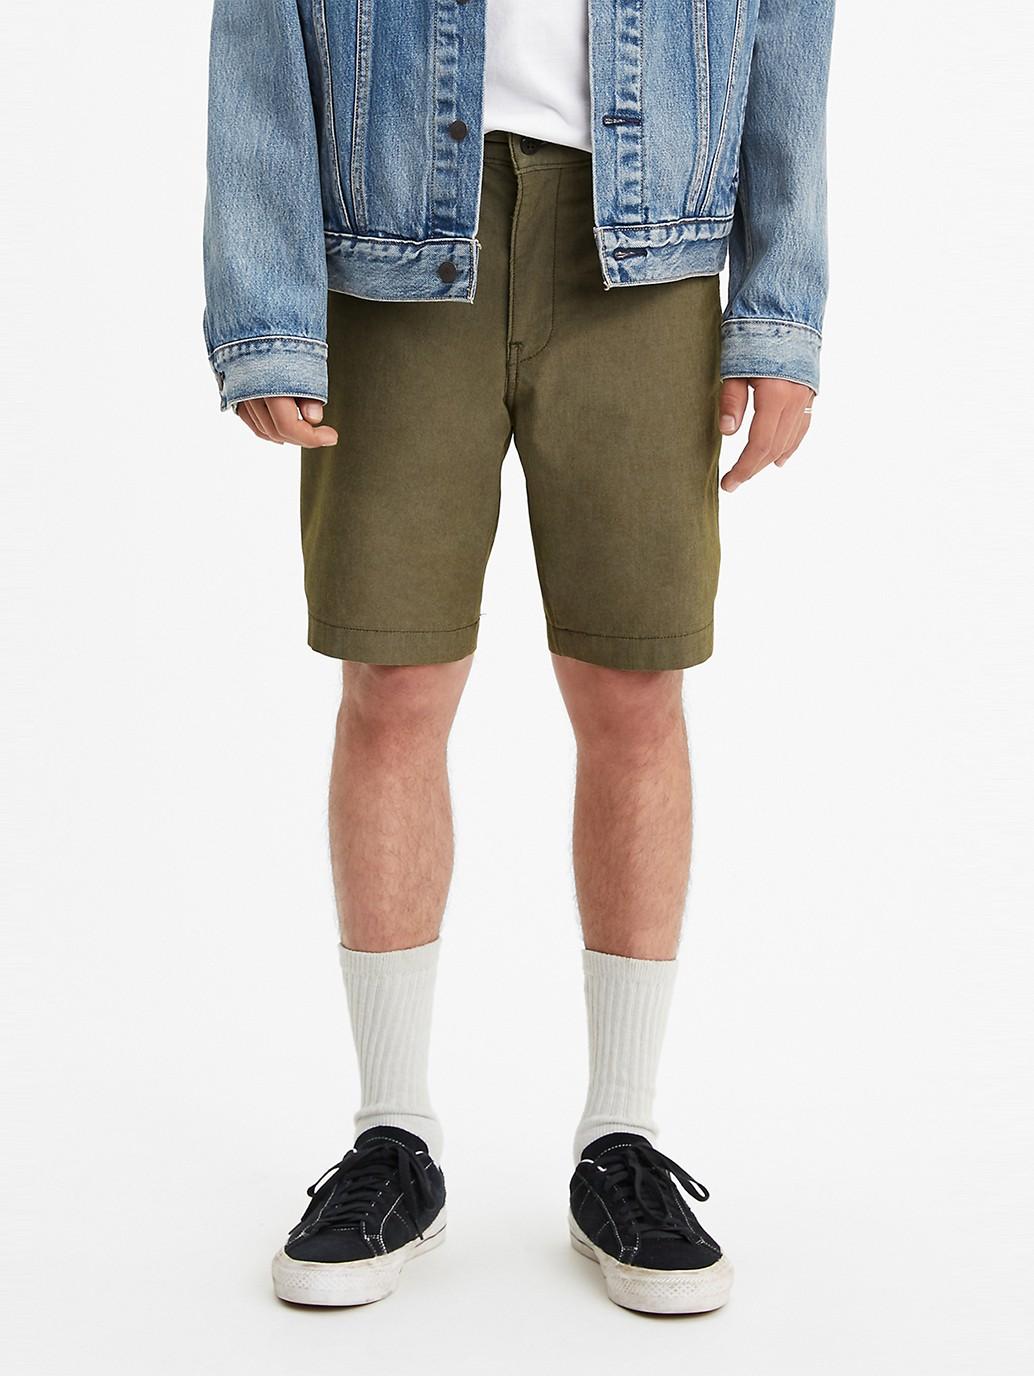 Buy Levi's® Men's XX Chino Shorts | Levi’s Official Online Store SG